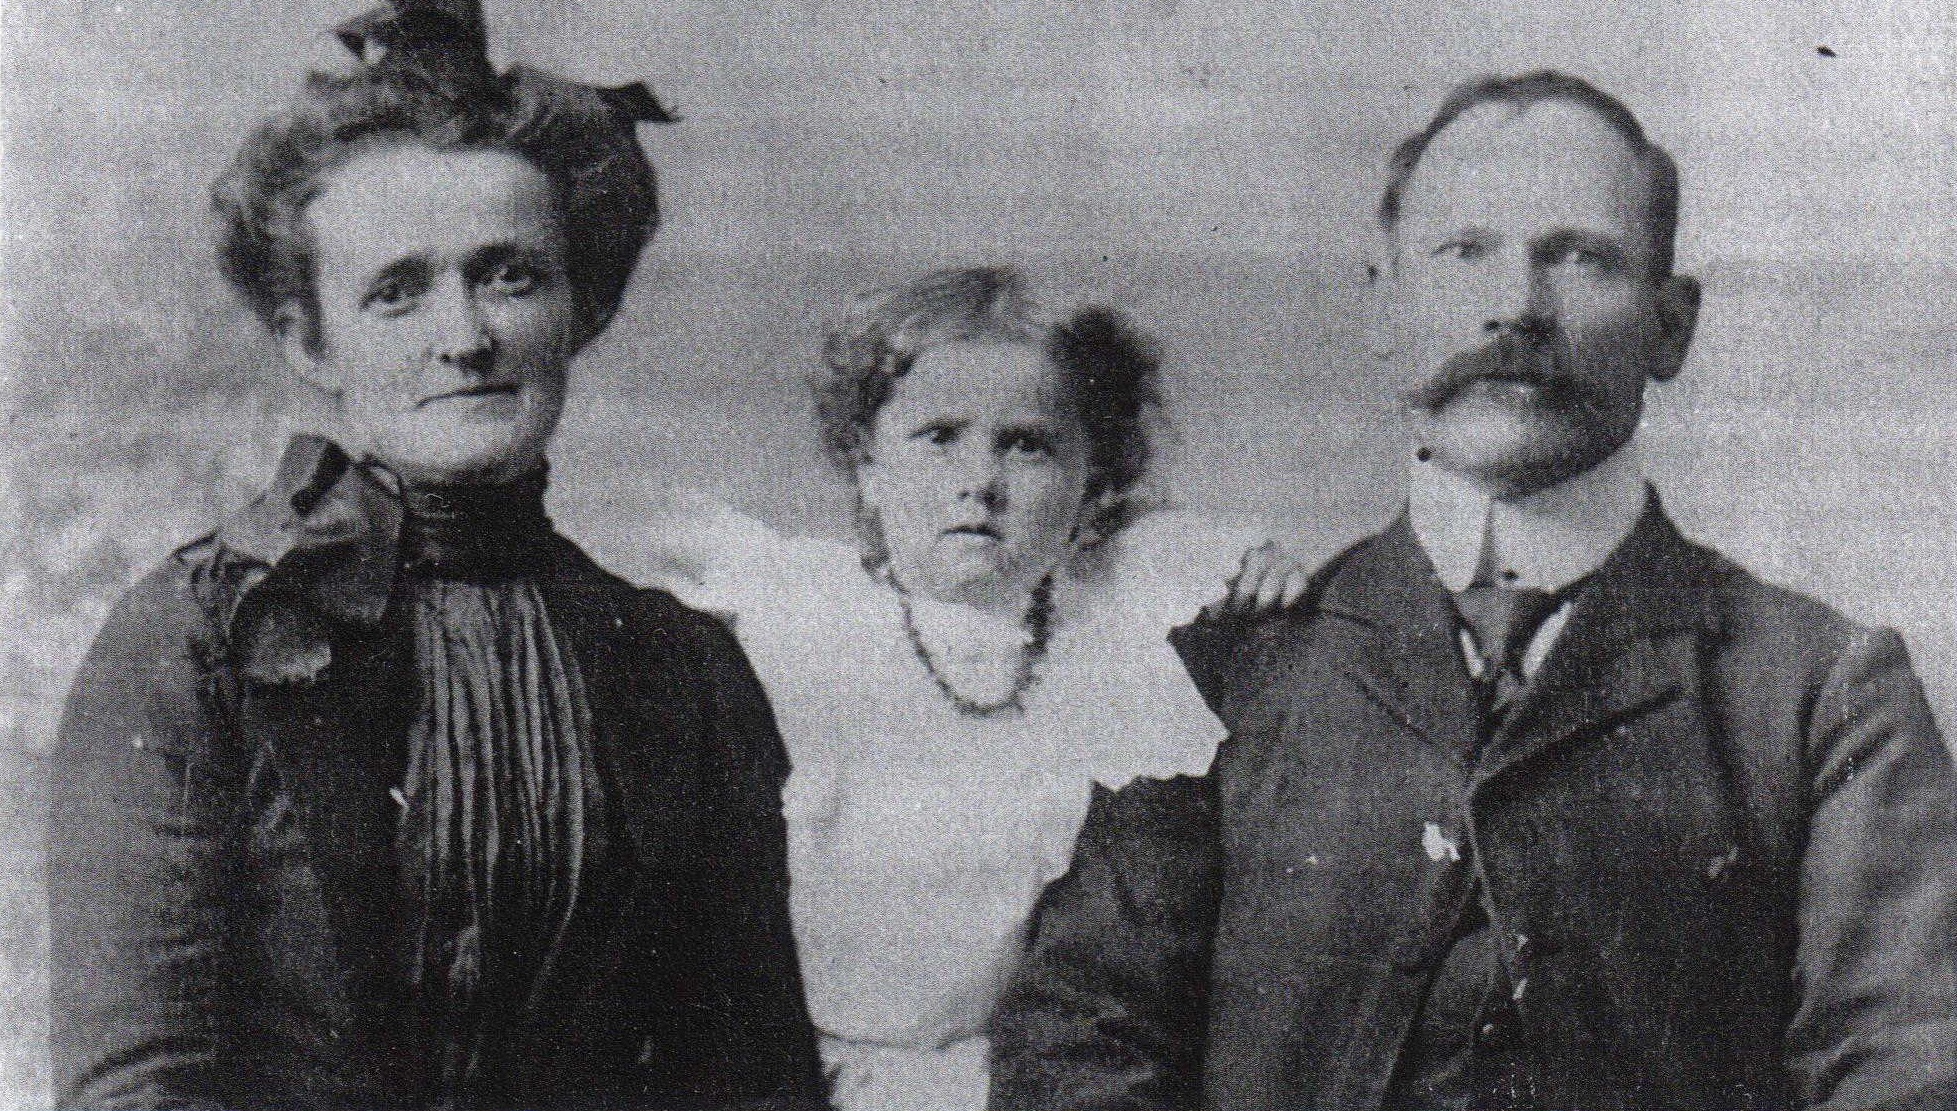 Ruth, Marguerite, and David McMullin